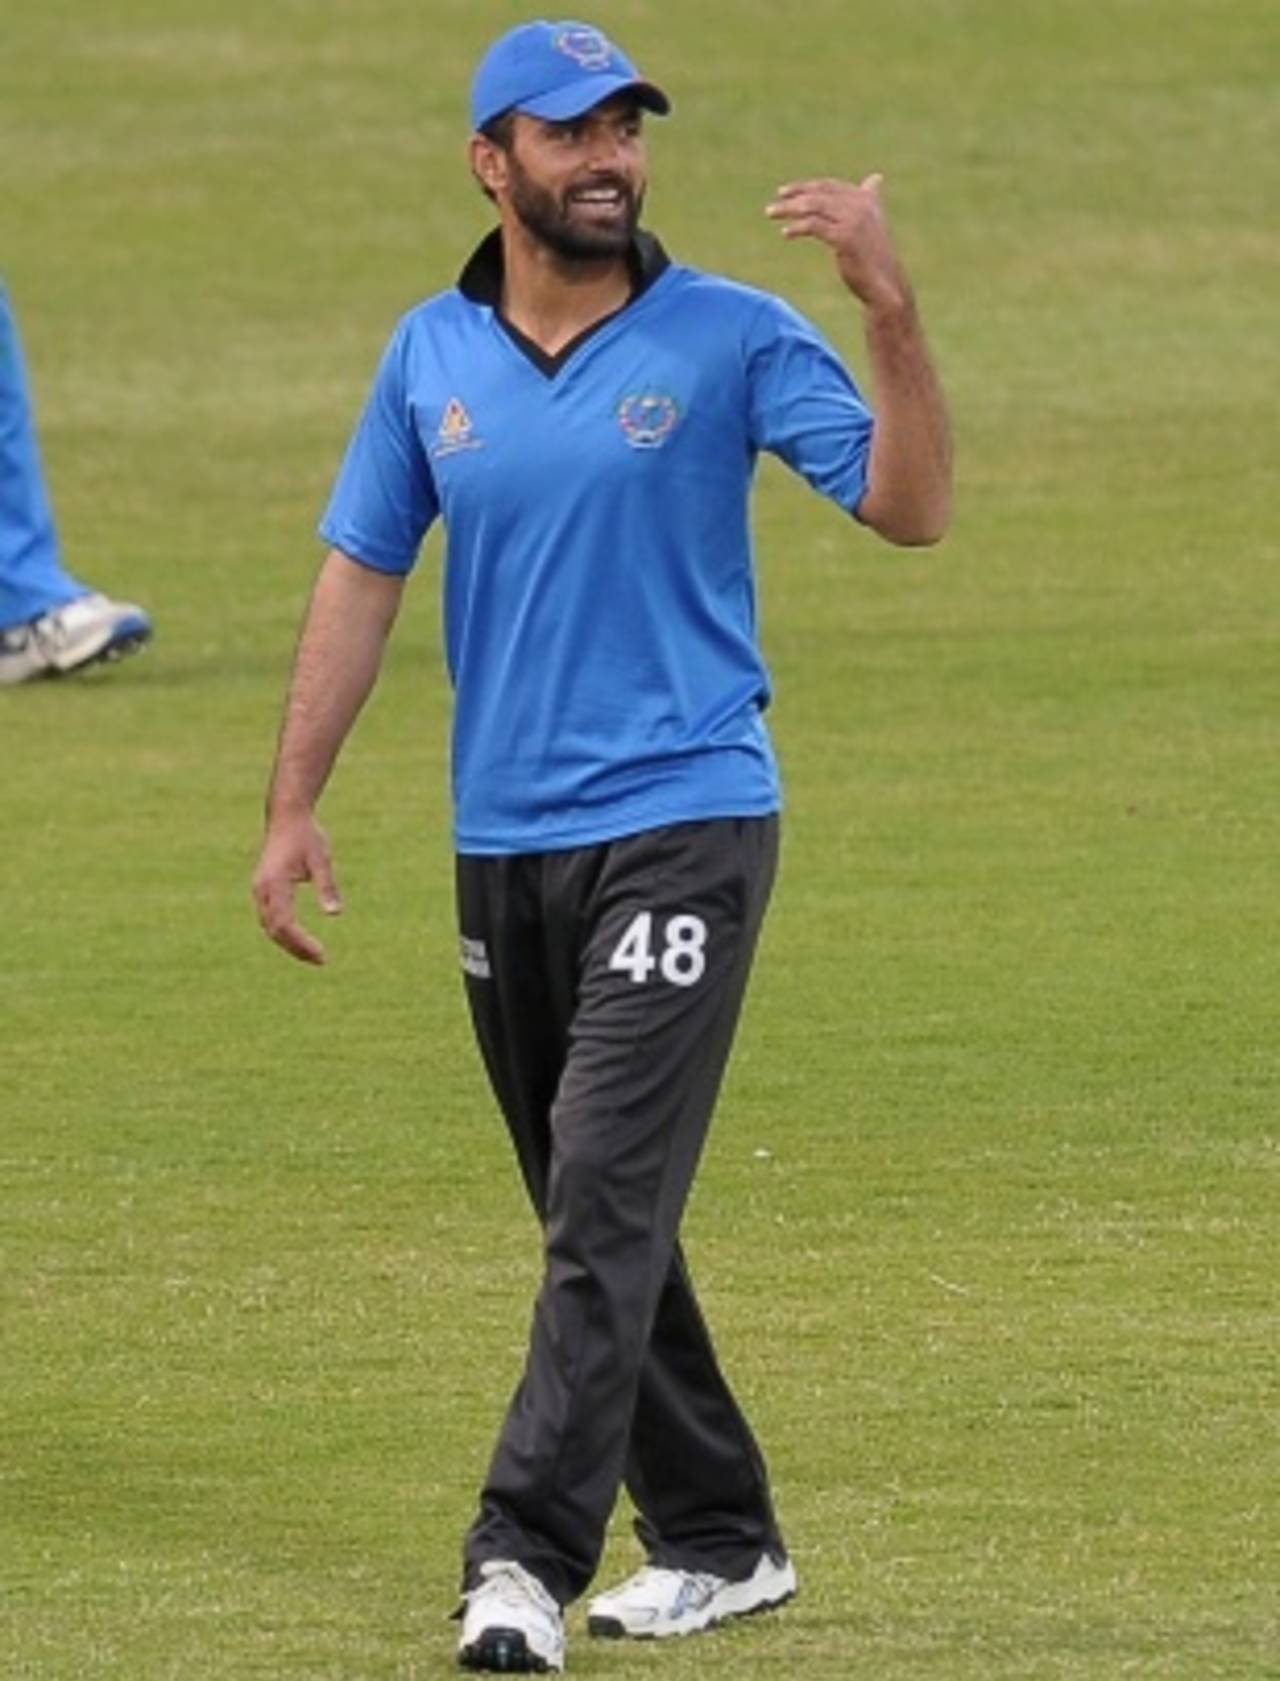 Nawroz Mangal, the Afghanistan captain, during a training session in Sharjah two days ahead of the ODI against Pakistan, February 8, 2012